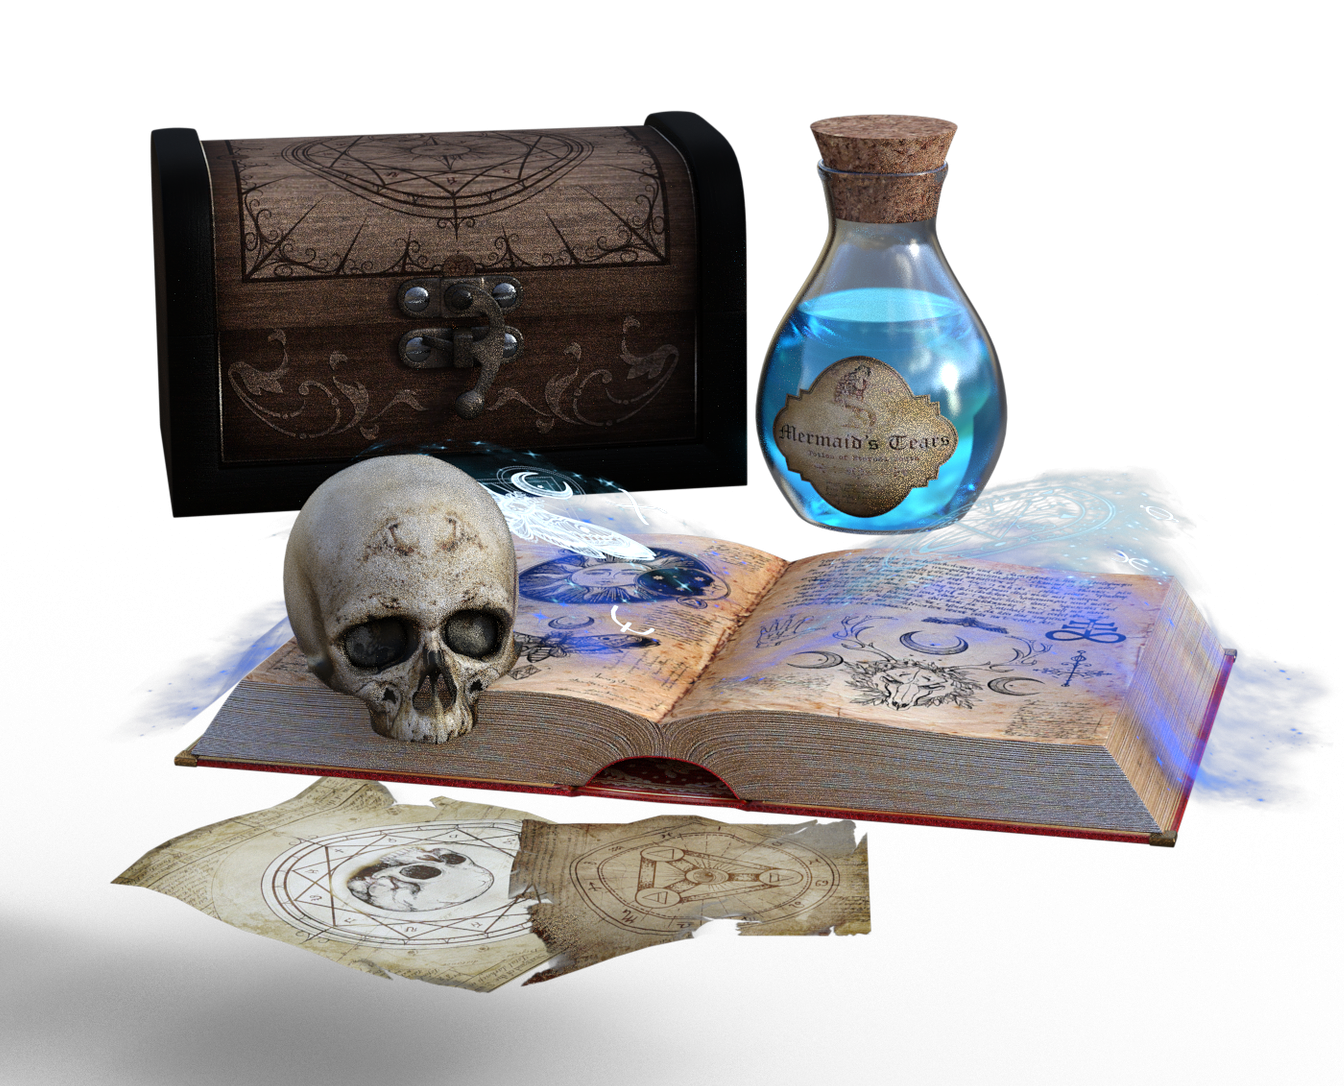 Magical items